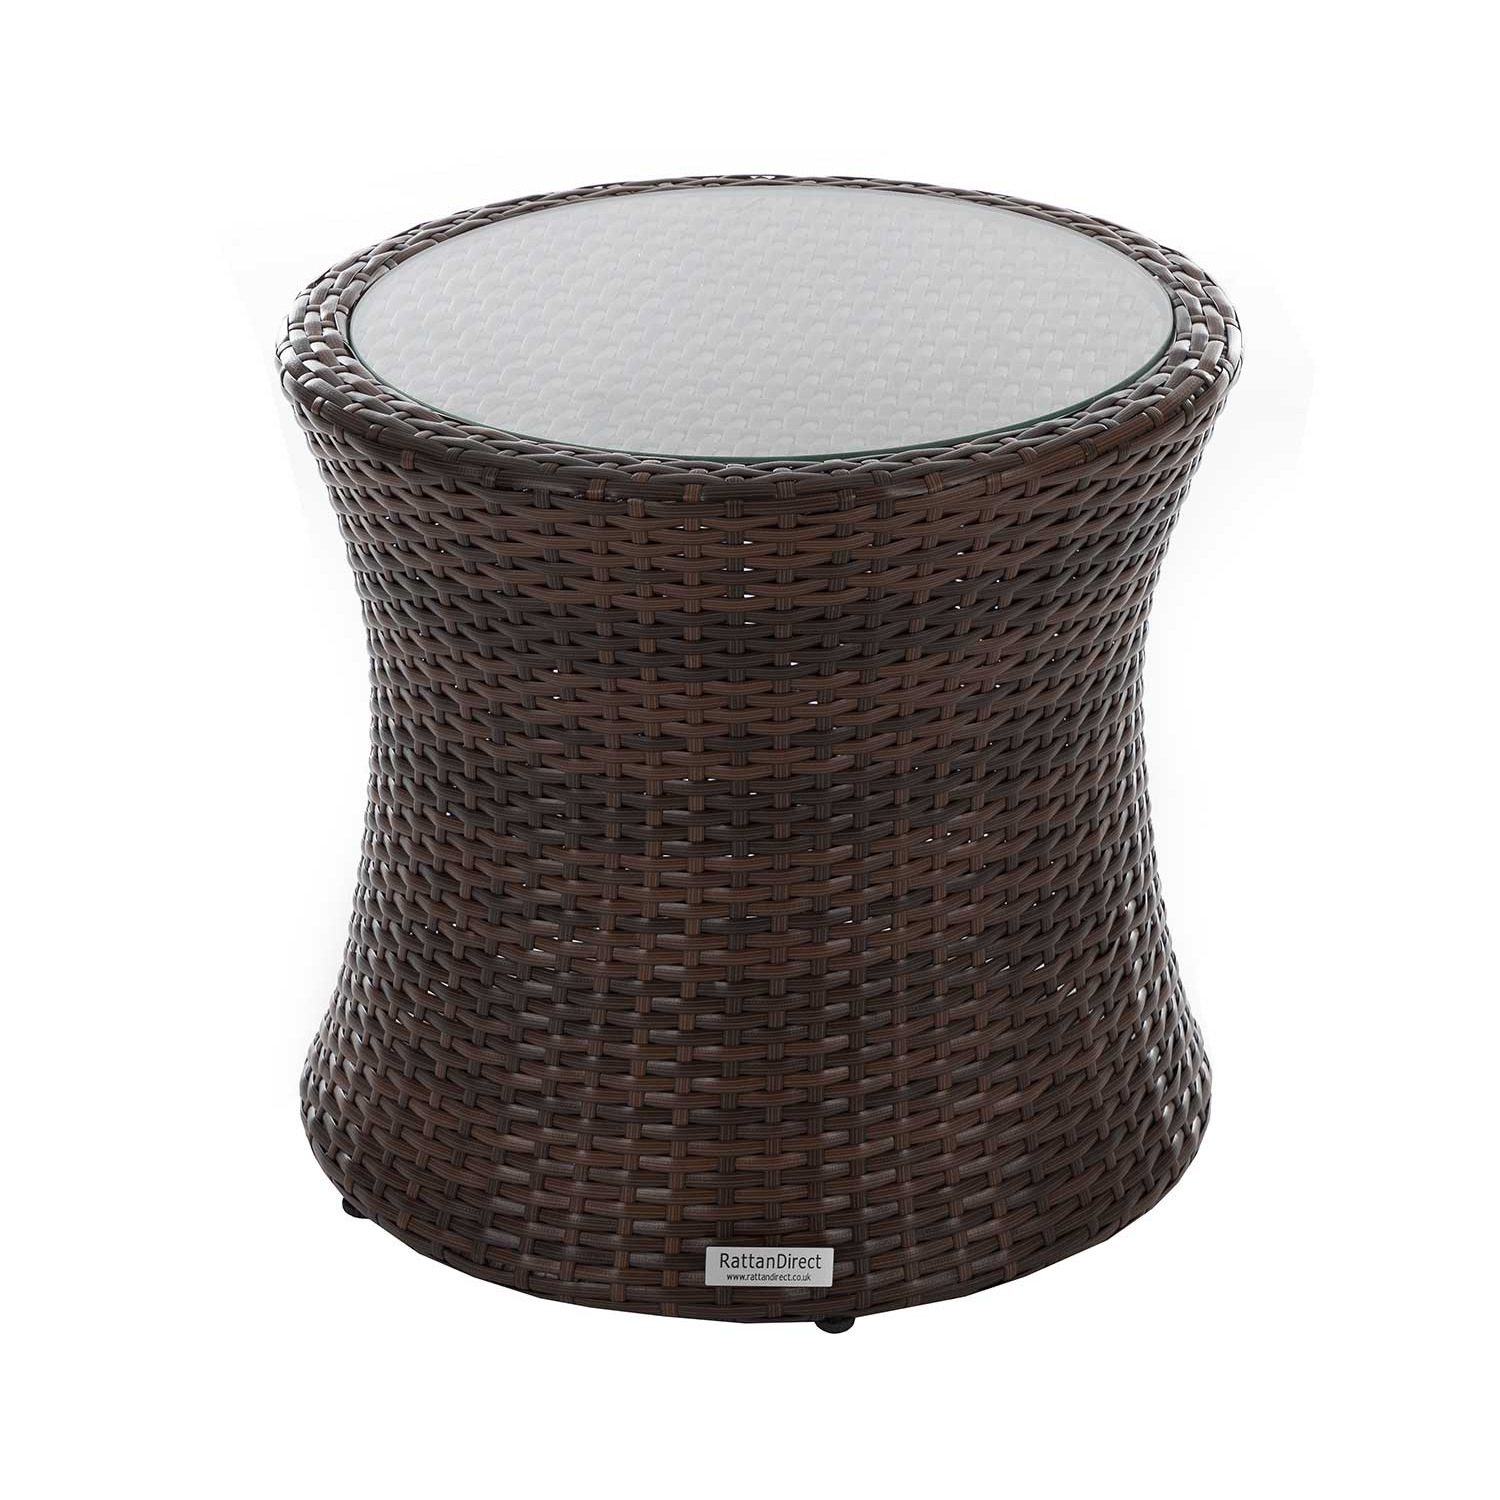 Rattan Garden Tall Round Side Table in Brown - Rattan Direct